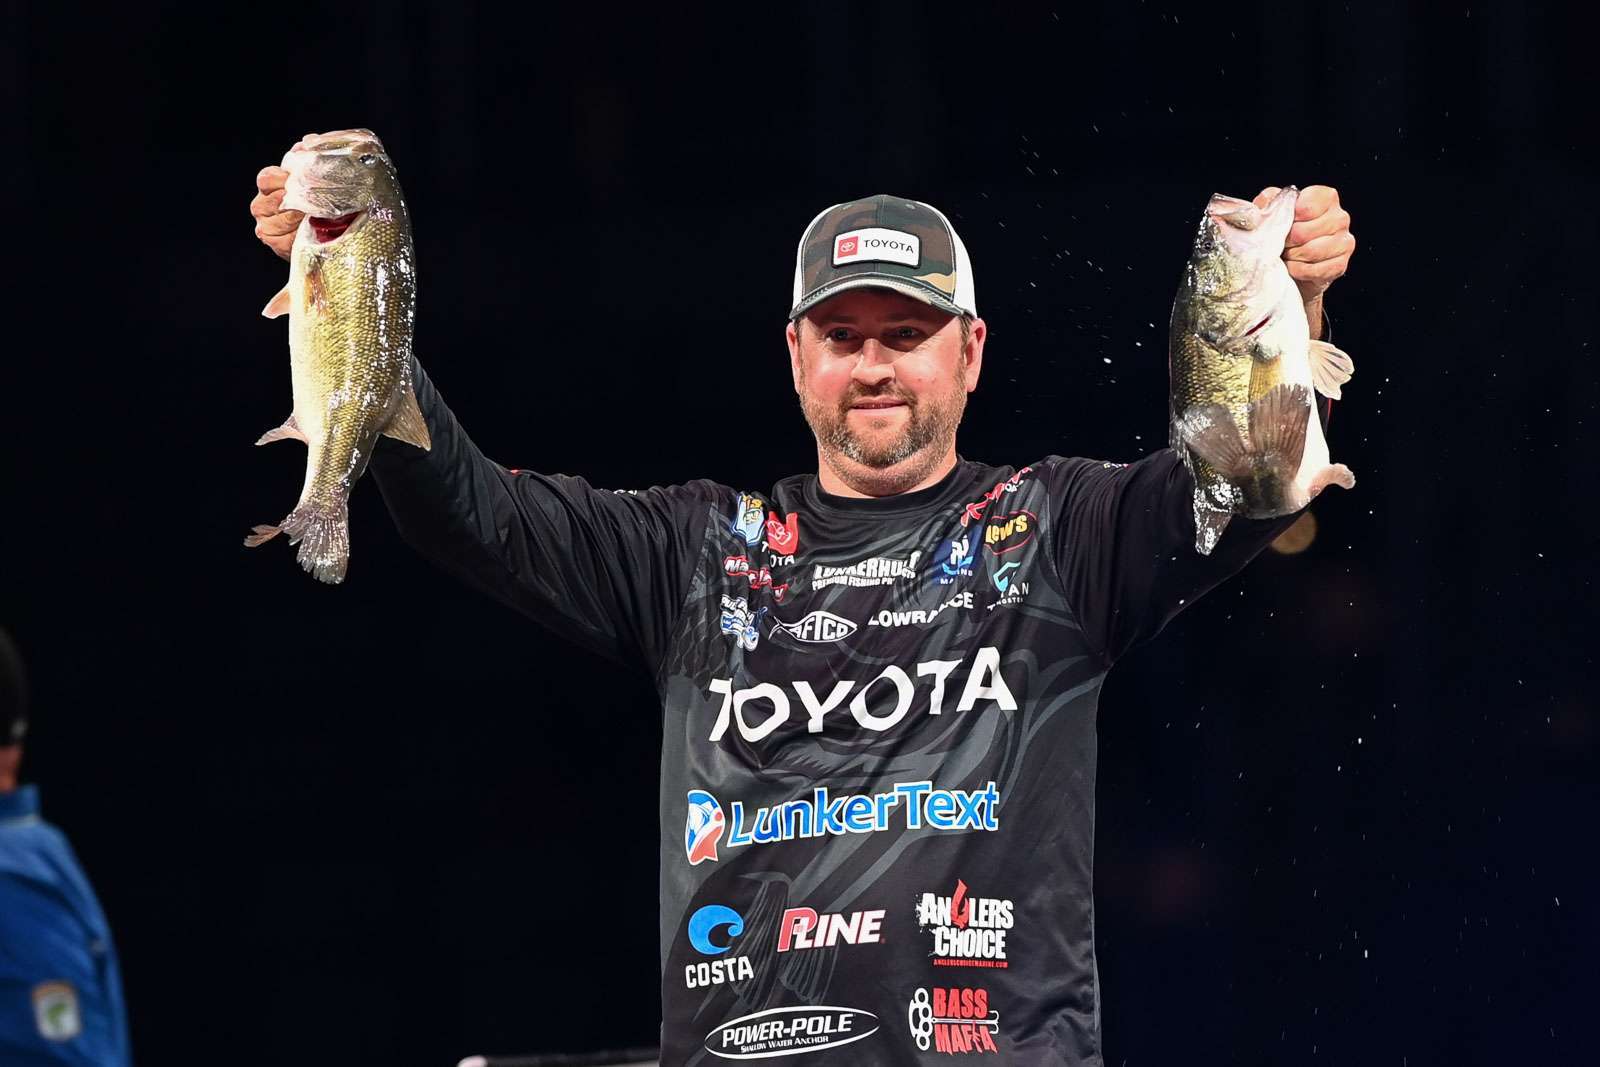 Bringing in solid limits was also critical to success. Matt Arey of Shelby, N.C., followed his 15-5 first day with 15-12 to jump from 17th to fifth. Arey started the season slowly but has gained momentum. Falling as far as 78th in the Bassmaster Angler of the Year standings, Arey has climbed to 40th with a good finishes, including 18th at Lake Fork and a fifth at Neely Henry. He continued his run at Ray Roberts.